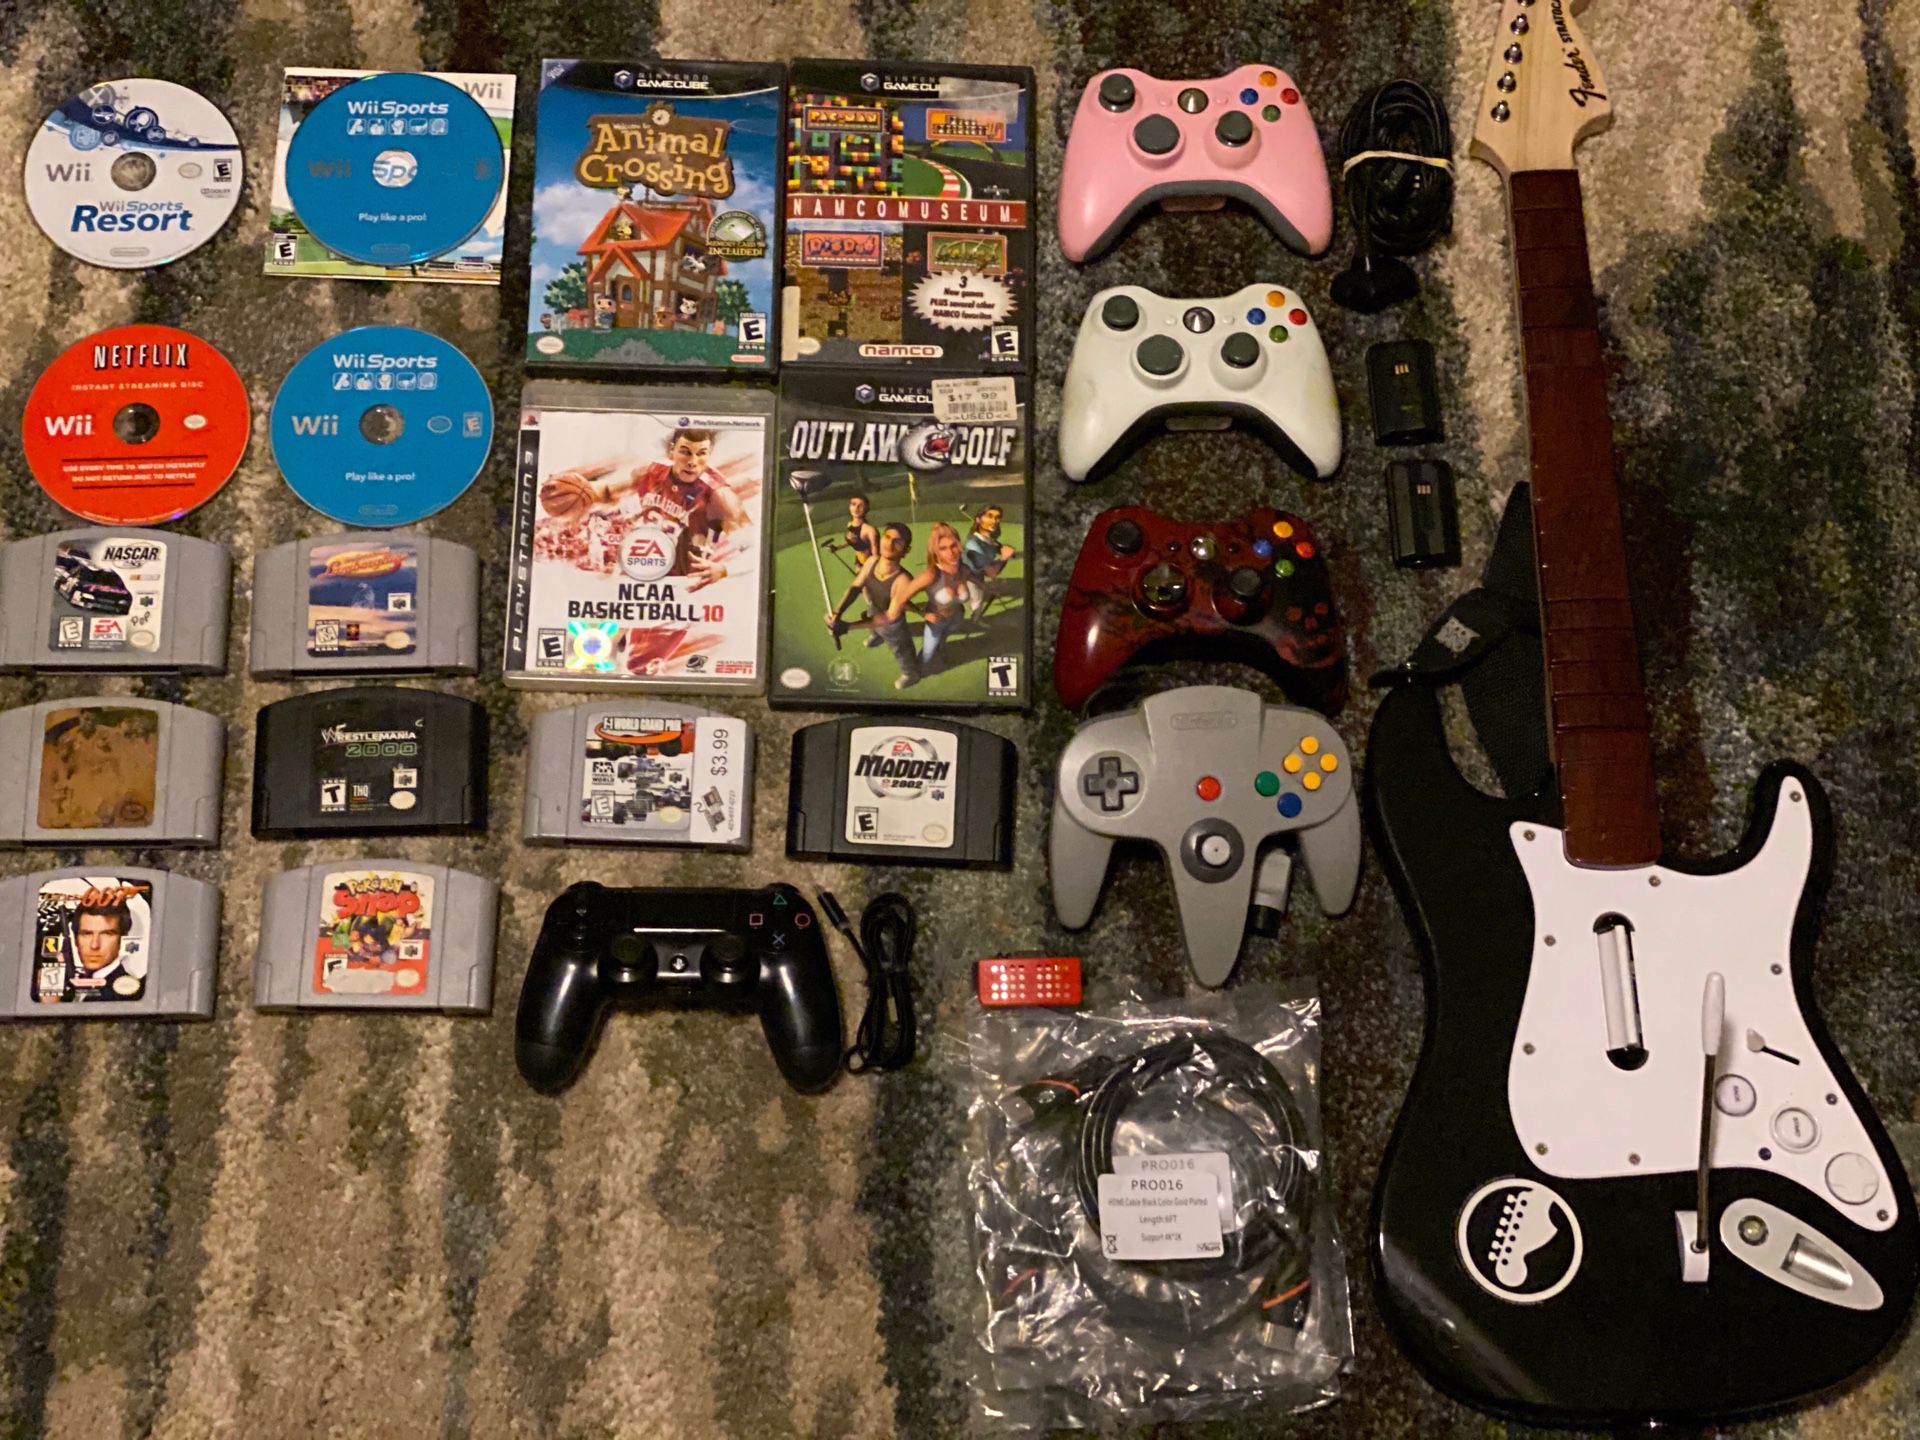 Games,controllers and accessories